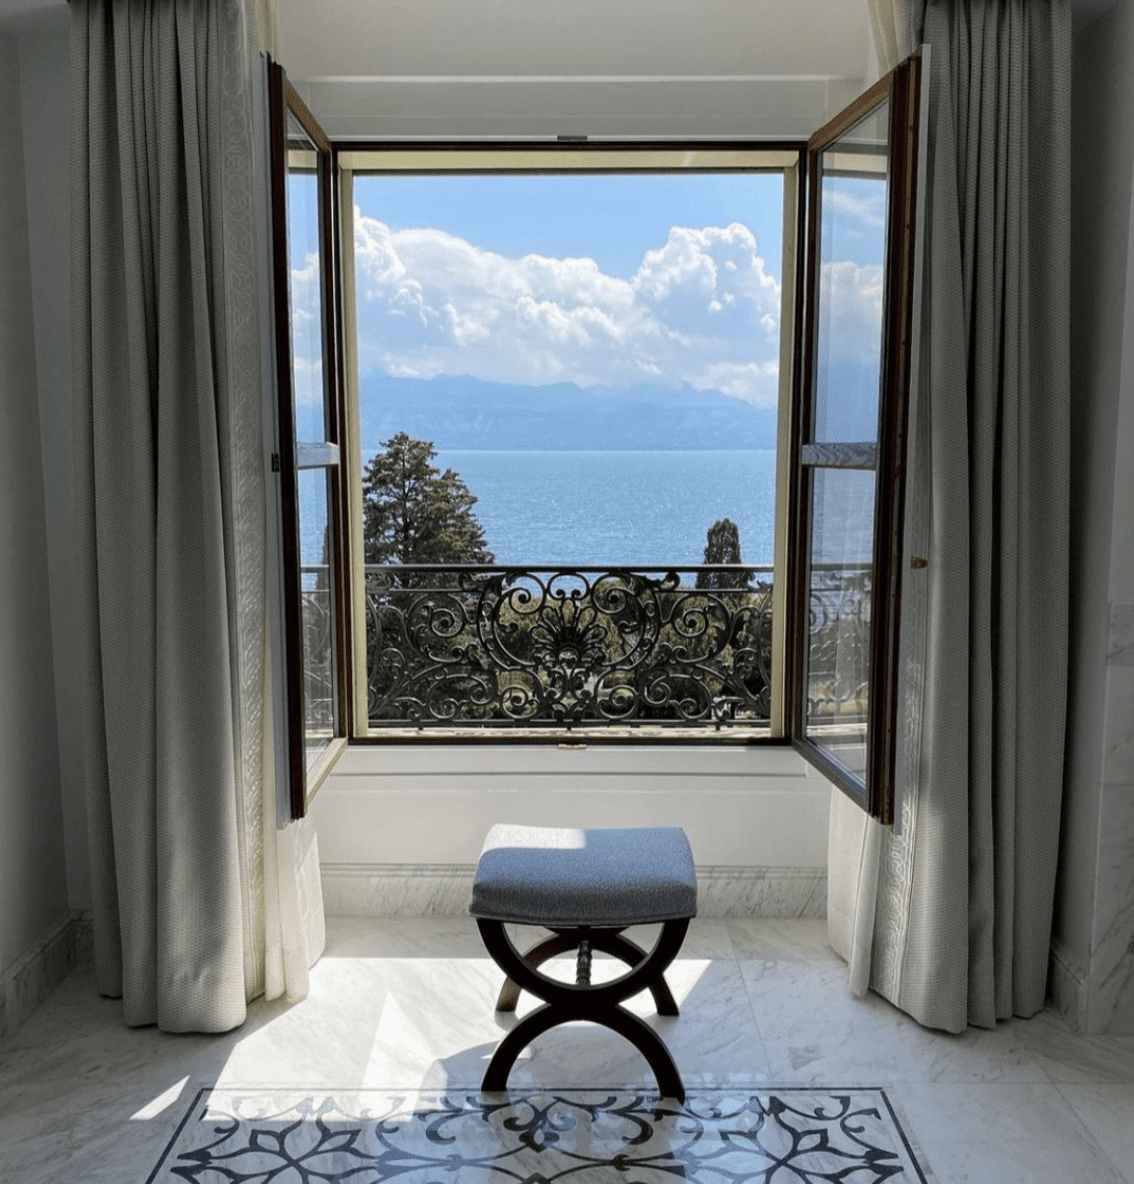 Rail holiday along the shores of Lake Geneva | Window looking over the lake at Beau-Rivage Palace in Lausanne on Lake Geneva